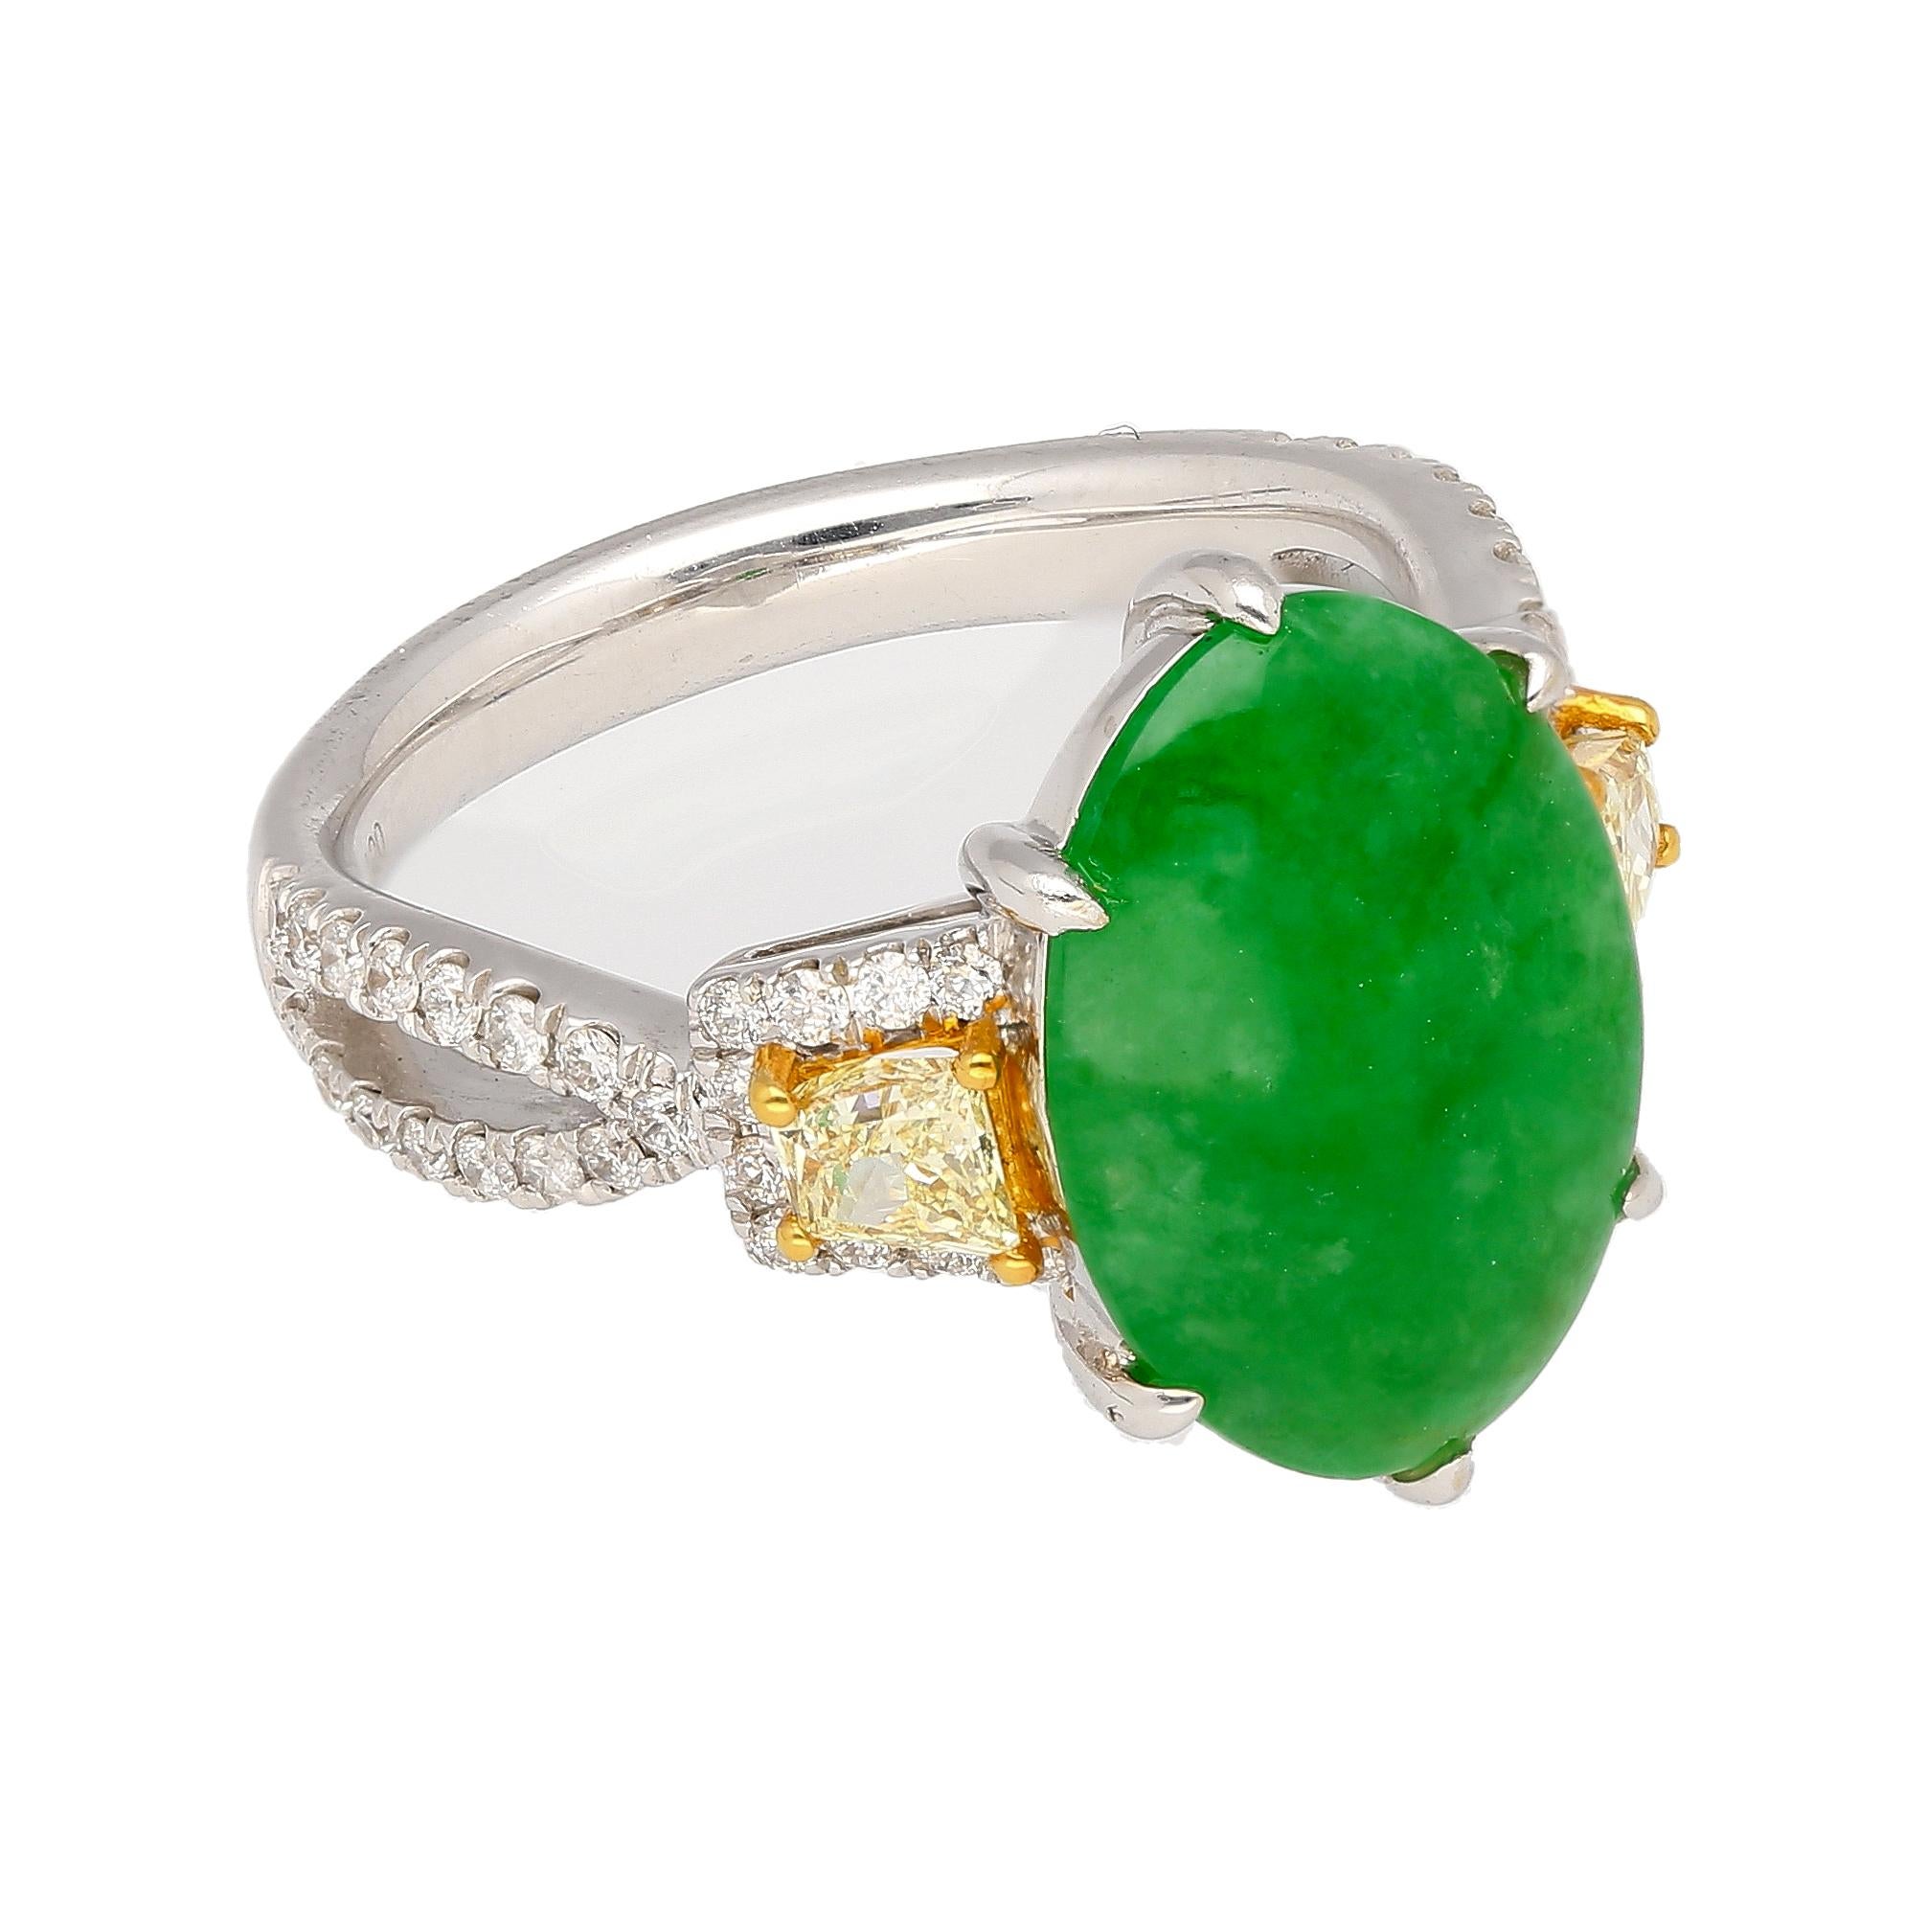 Introducing a rich display of fine jewelry excellence. A multi stone cocktail ring featuring a 4.76 carat Jadeite Jade with Yellow Trapezoid Cut Diamond side stones and a white diamond pave overlapping open ring shank. 

Item Details:
- Type: